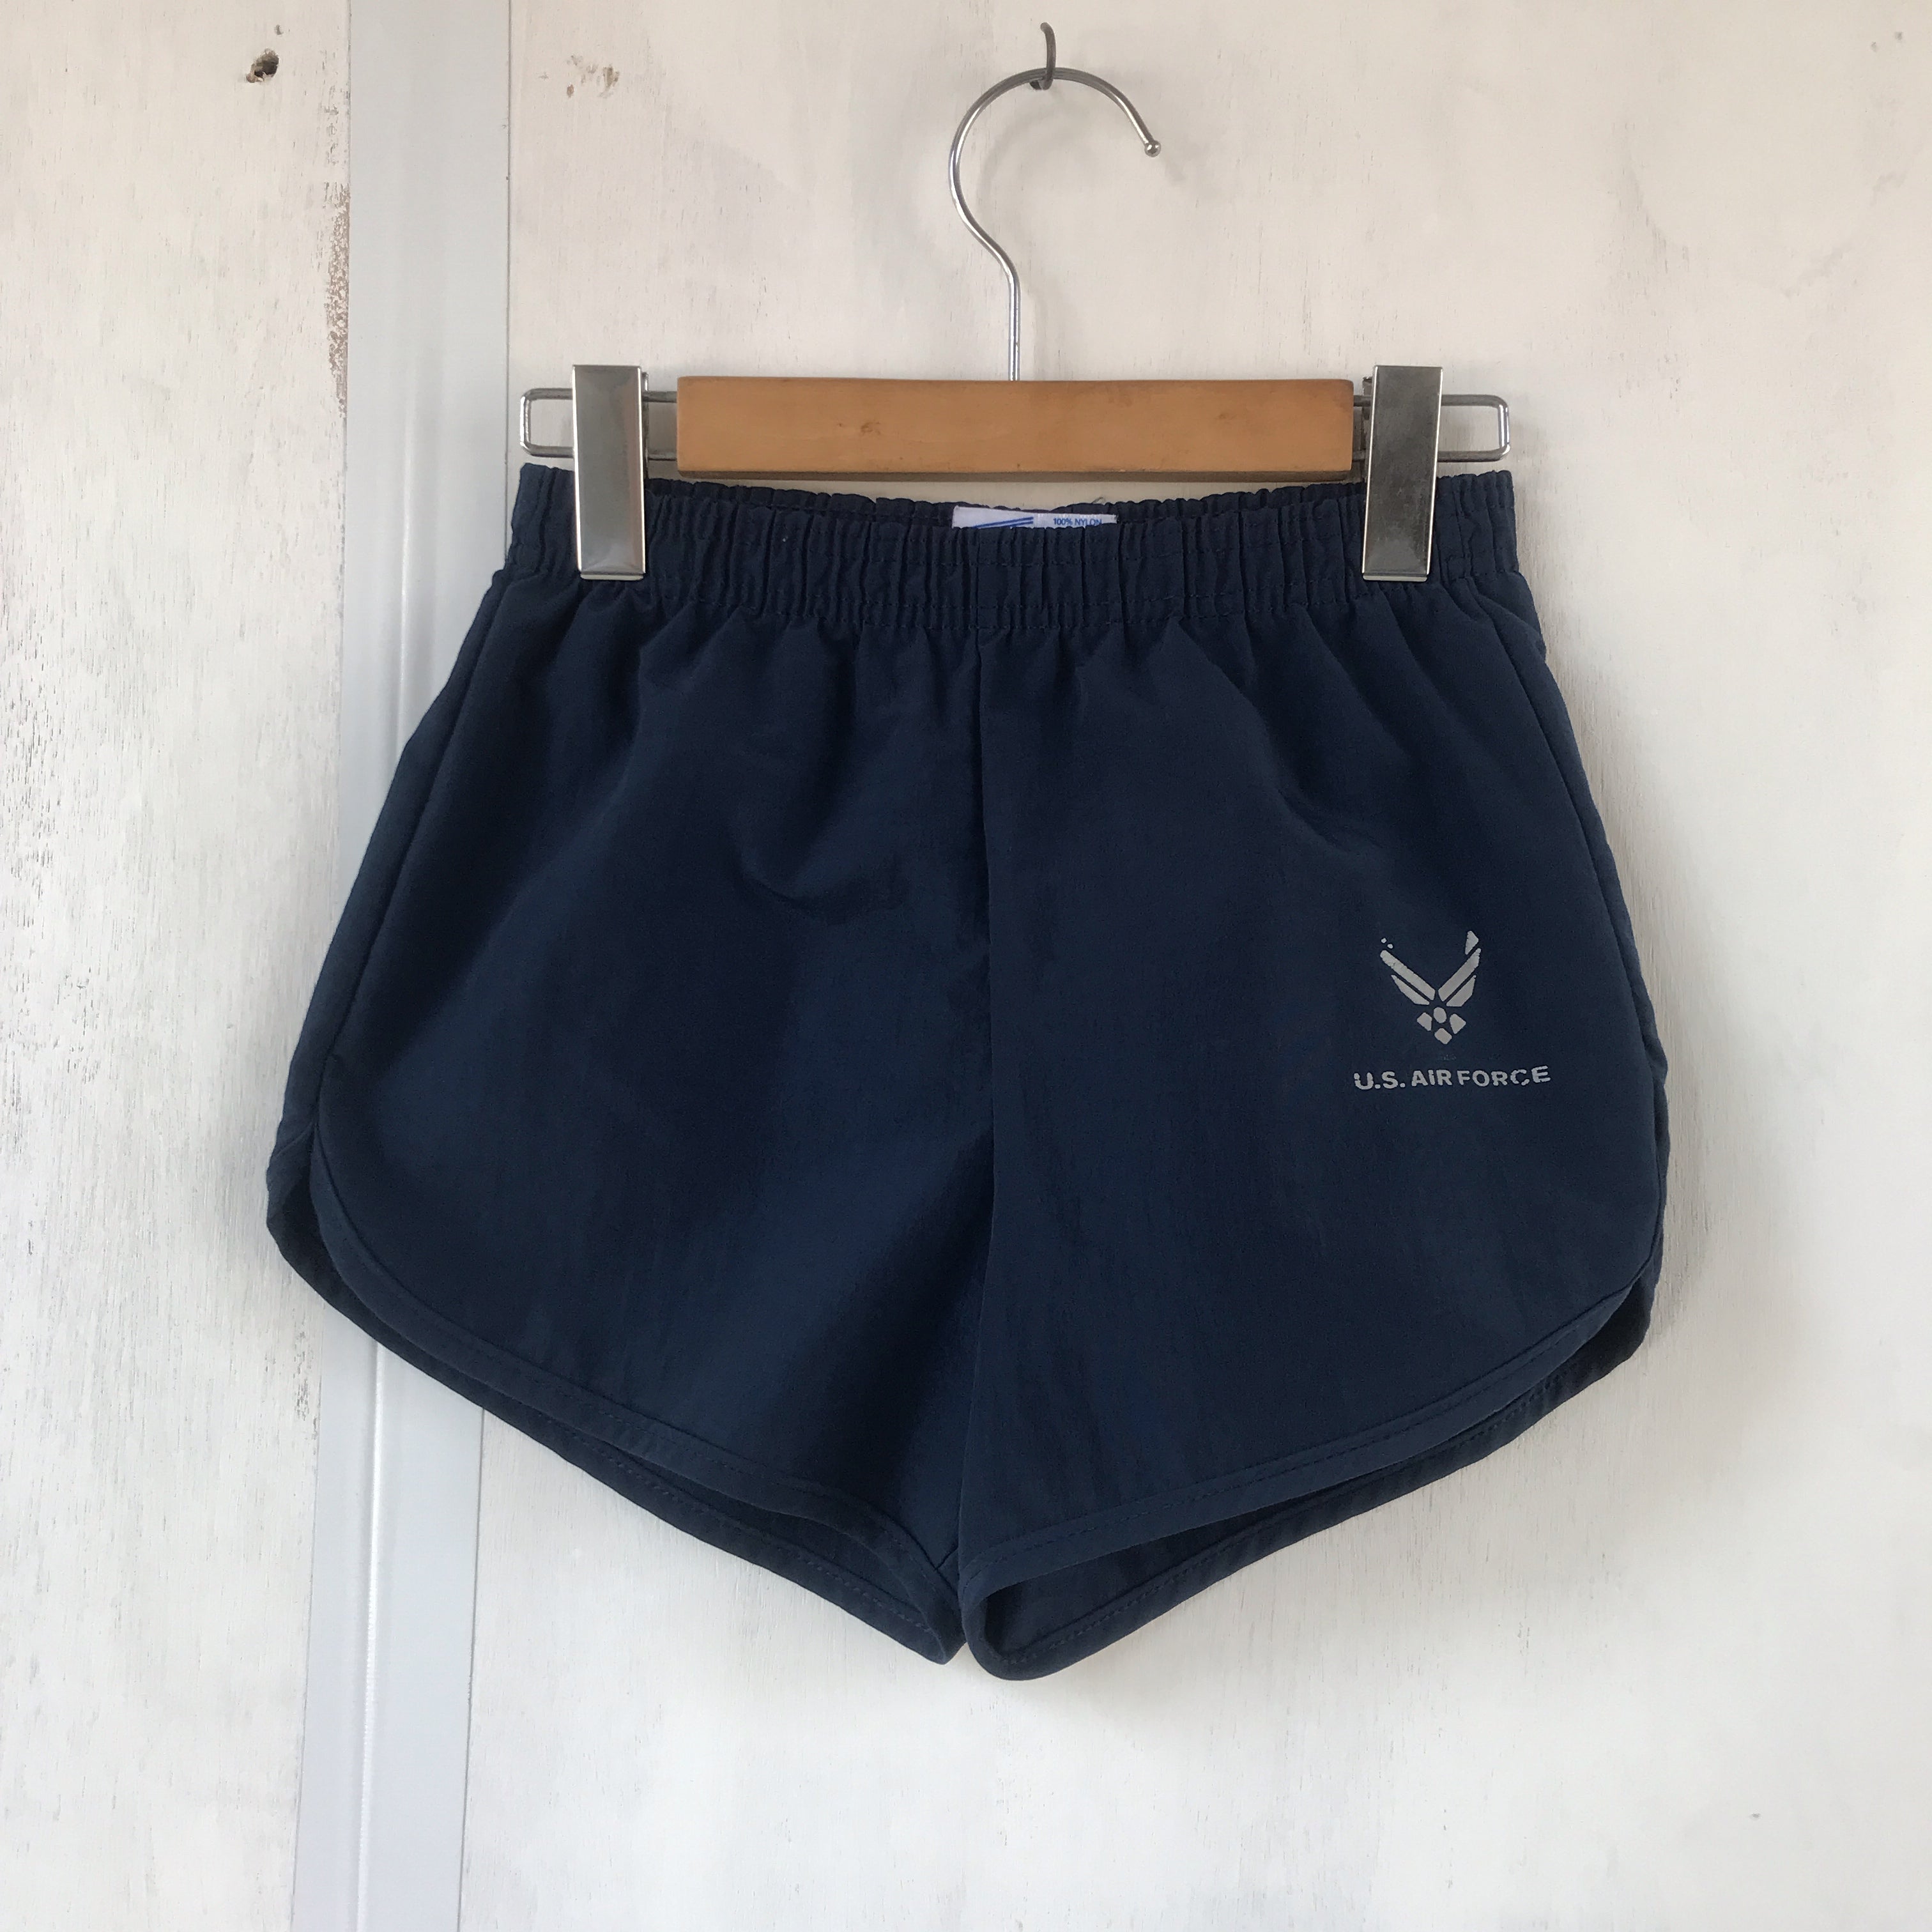 [ ONLY ONE ! ] U.S.AIR FORCE TRAINING SHORTS / U.S.MILITARY